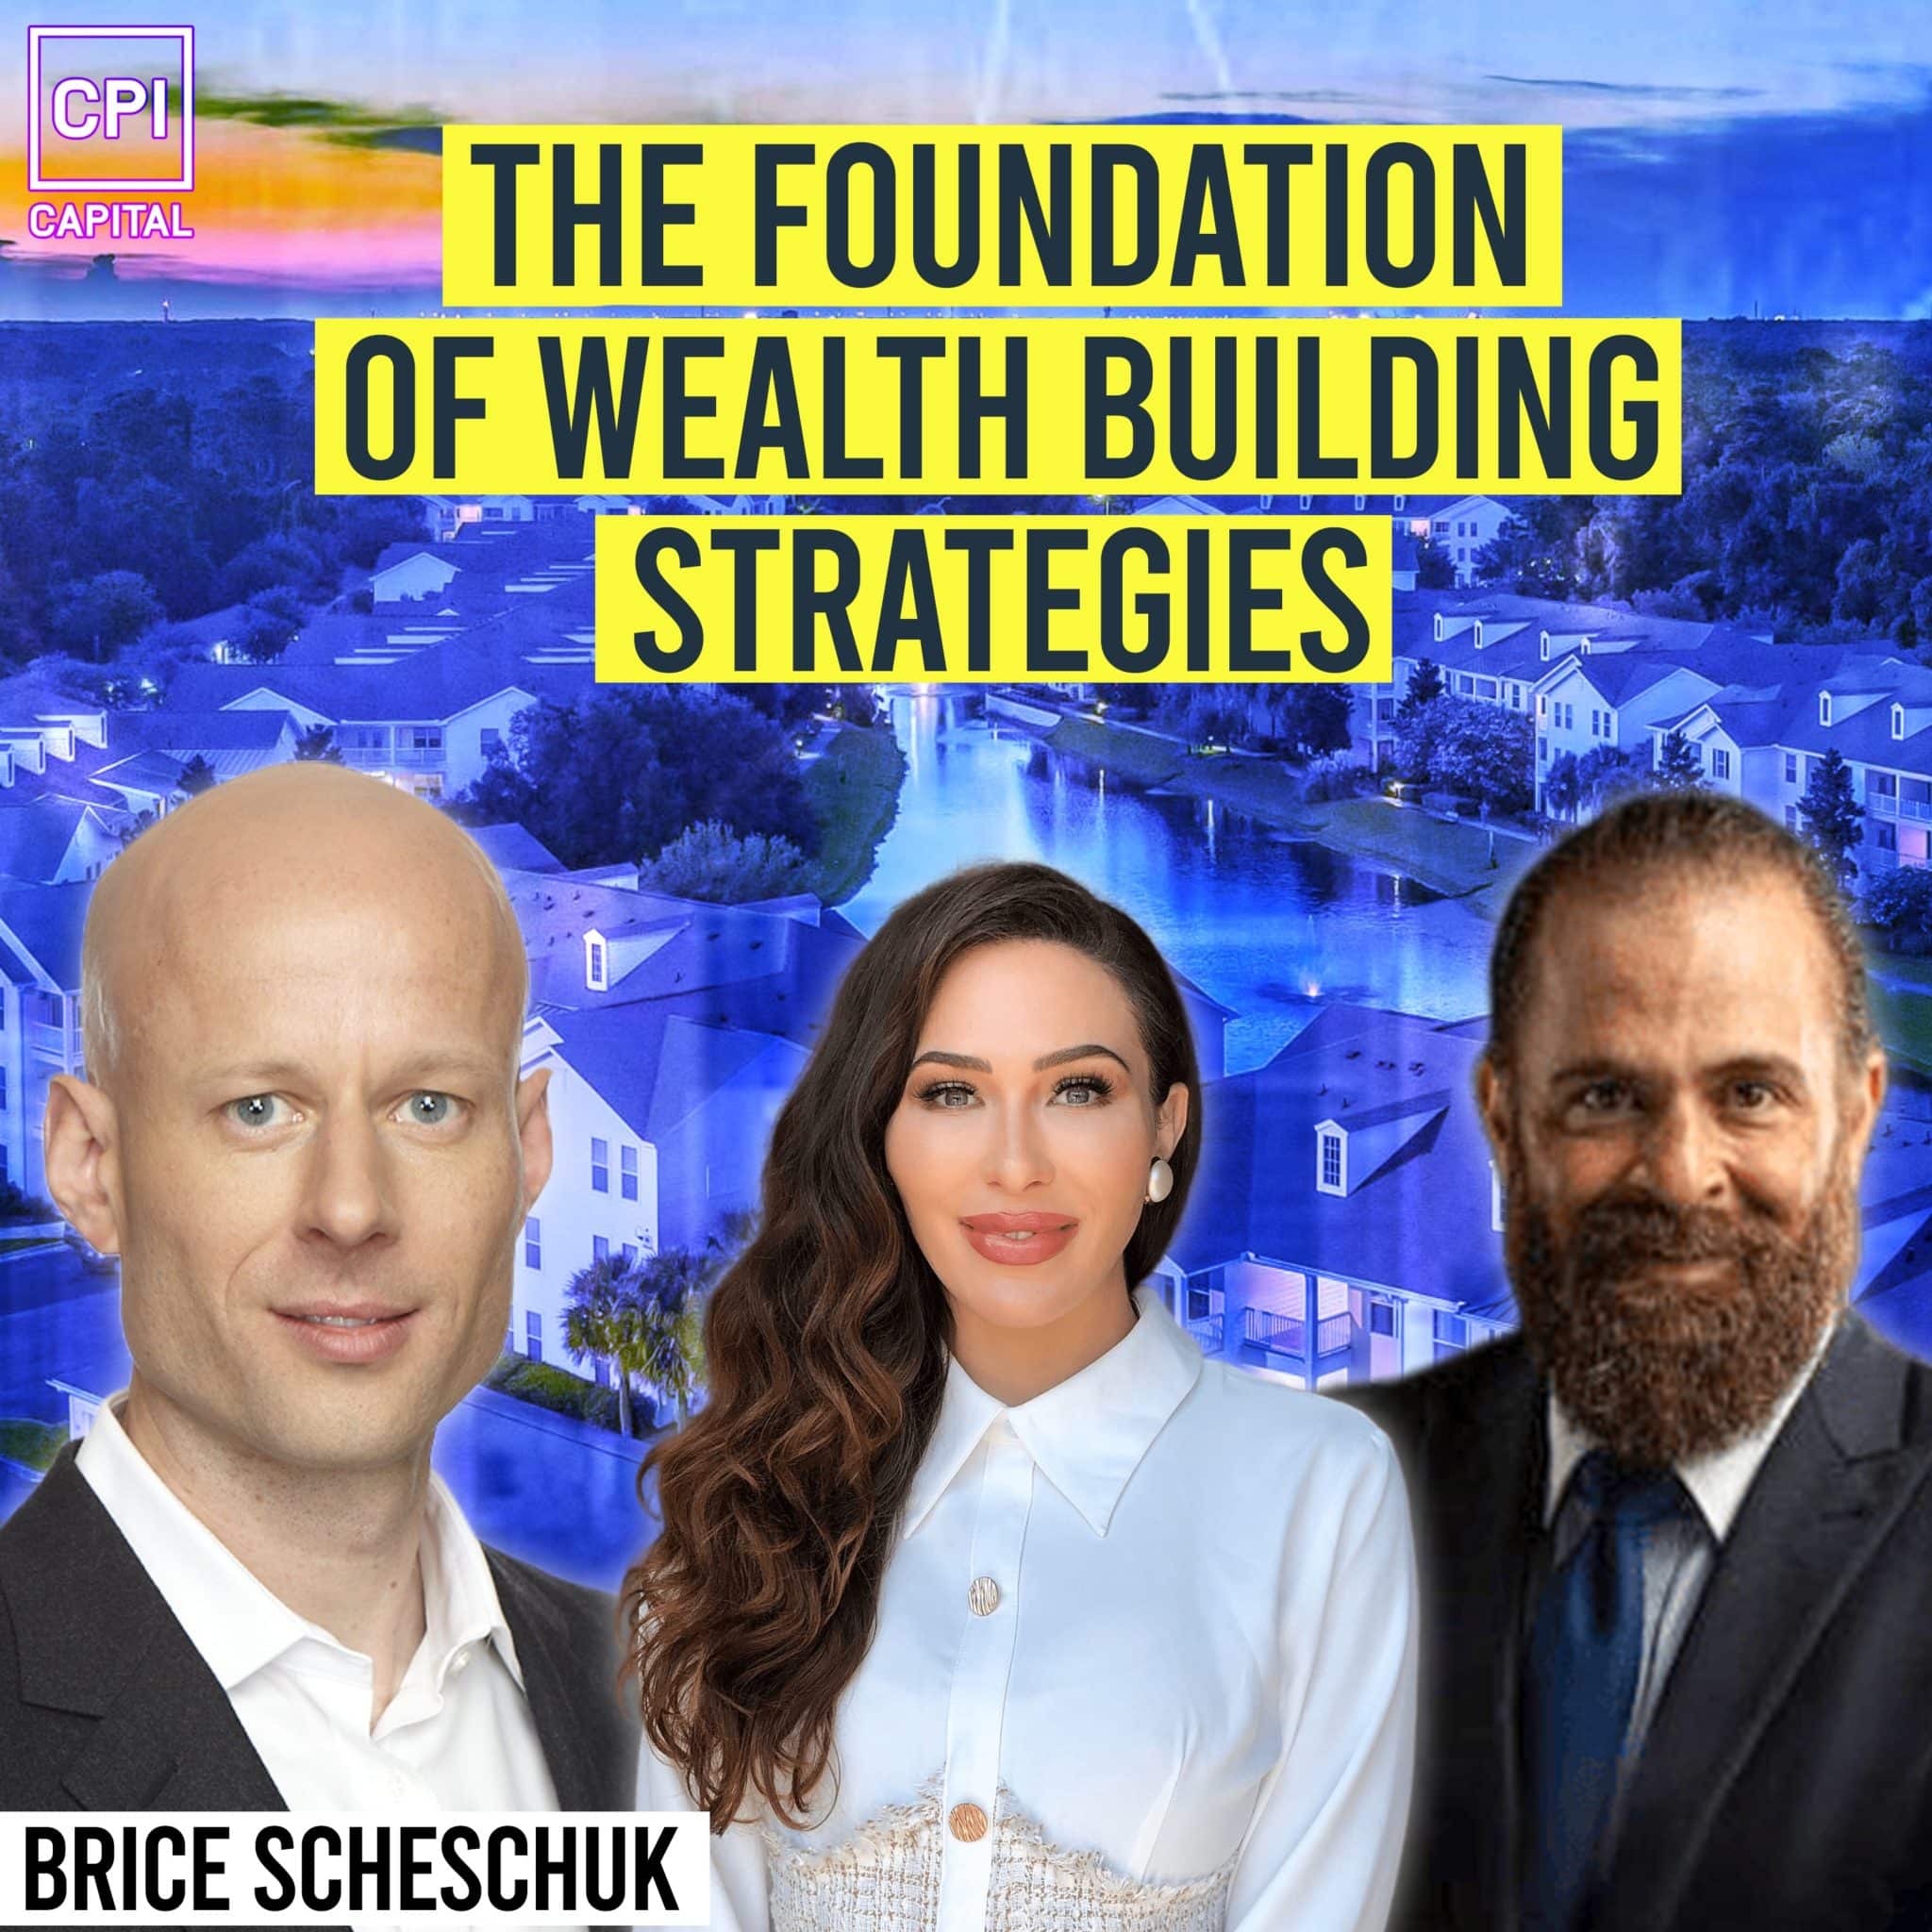 The Foundation Of Wealth Building Strategies – Foundations Of Building Wealth – Brice Scheschuk 2022